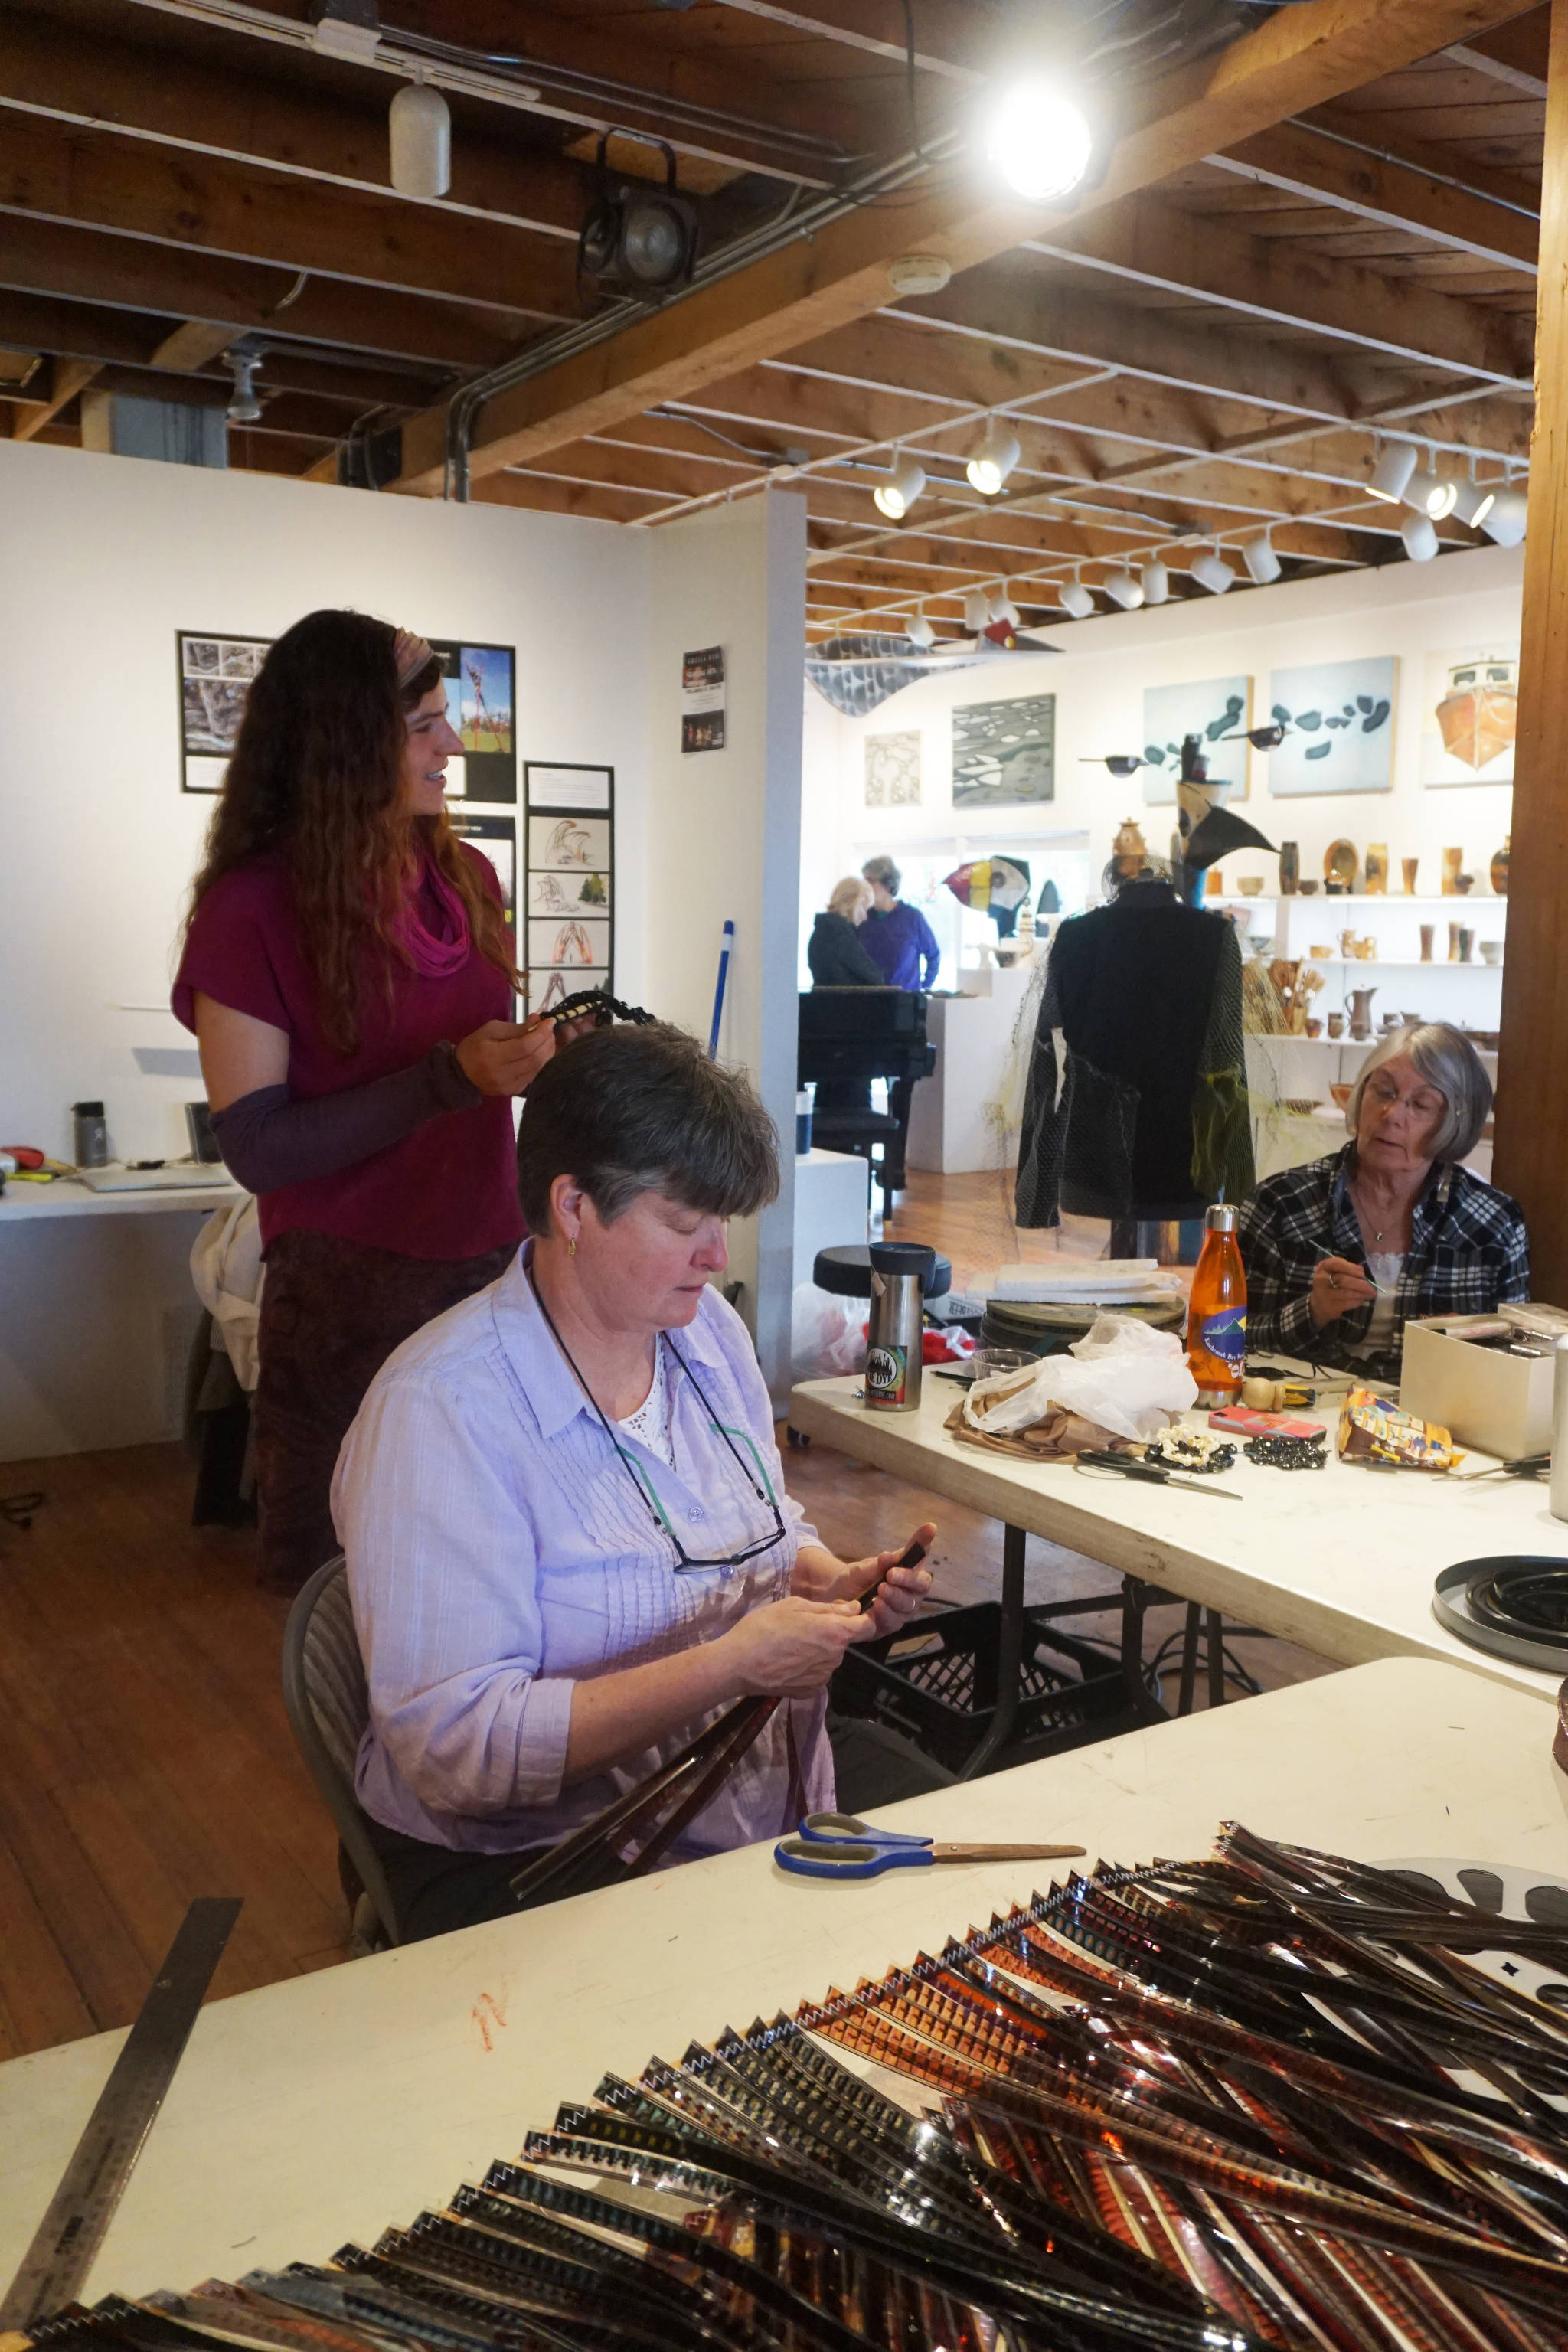 Kayla Spaan, left, and Megan O’Neill, right, work on Wearable Arts pieces Saturday, Oct. 14, 2017 at a workshop with Sheila Wyne at the Bunnell Street Arts Center in Homer, Alaska. Wyne is artist in residence at Bunnell for a residency sponsored by the Homer Fiber Arts Collective. (Photo by Michael Armstrong)